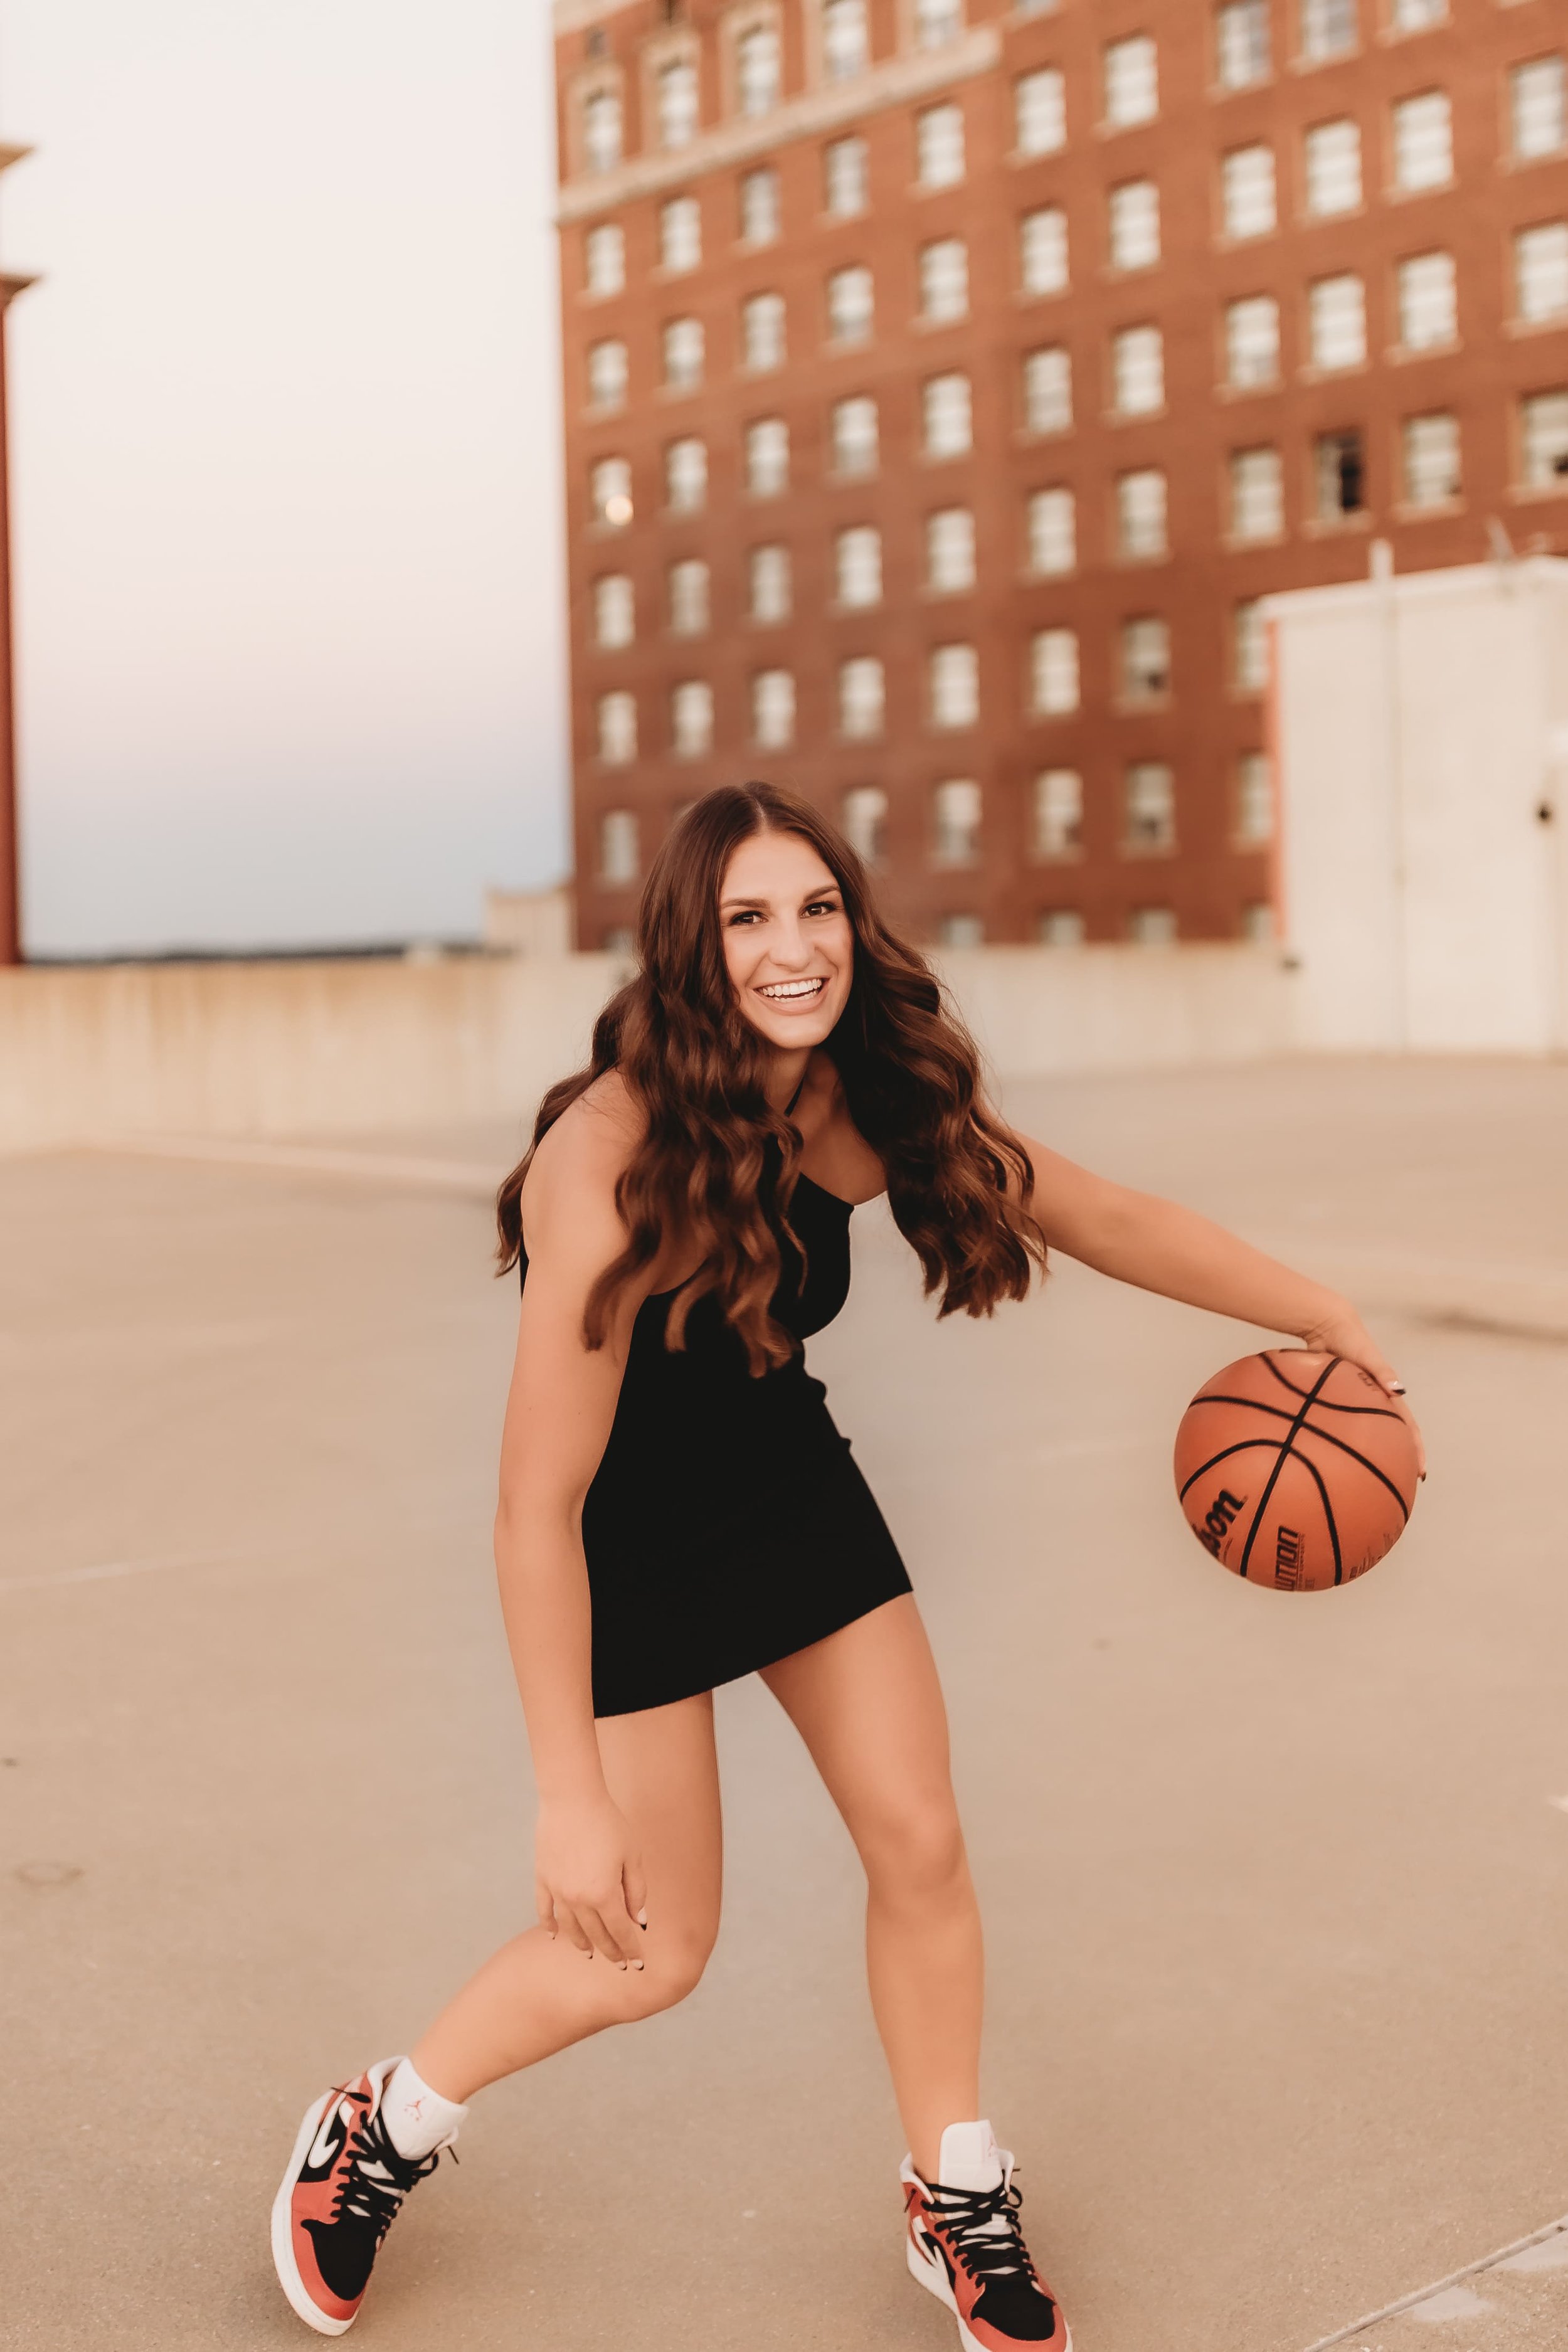  Senior girls basketball player dribbles a basketball on a downtown peoria rooftop while posing for senior pictures basketball 